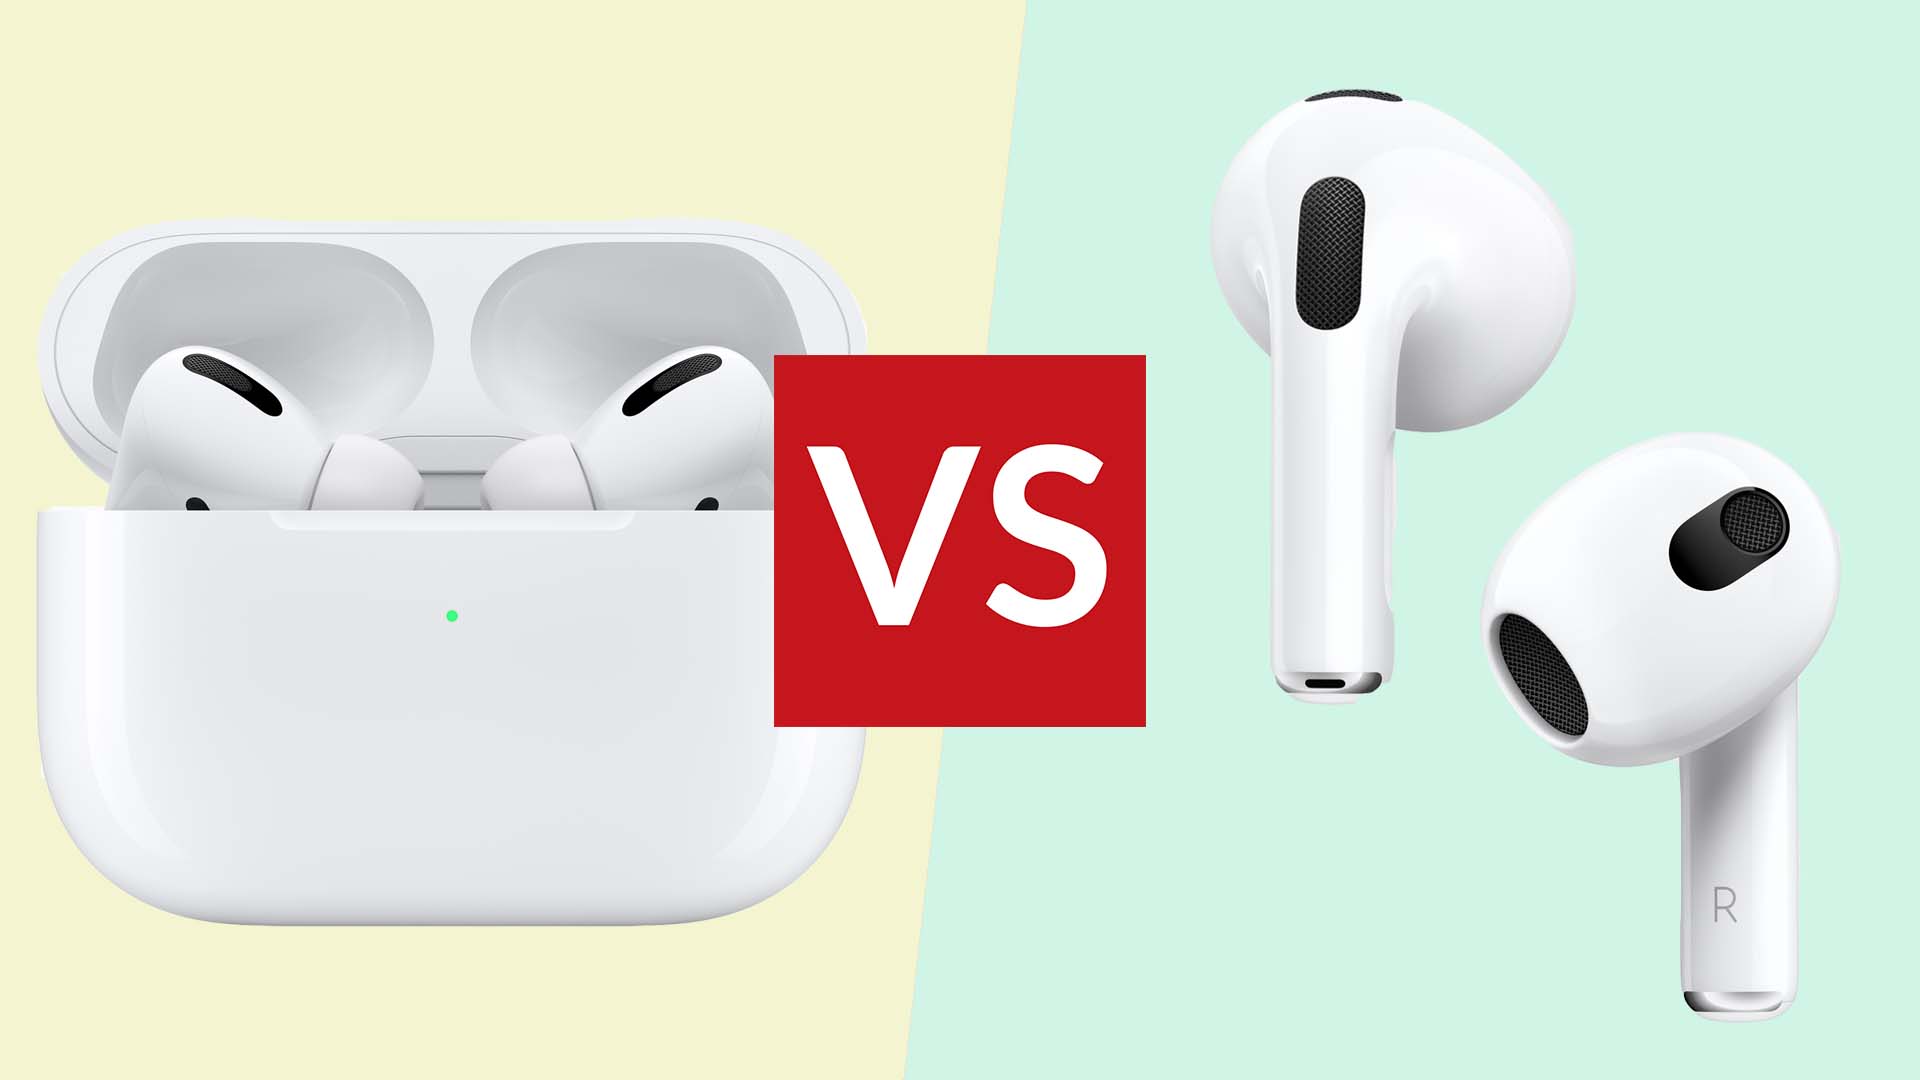 AIRPODS 3 поколение. AIRPODS 3rd Generation. Apple AIRPODS 3rd Generation. AIRPODS Pro 2 и AIRPODS 3. 3 поколение наушников airpods